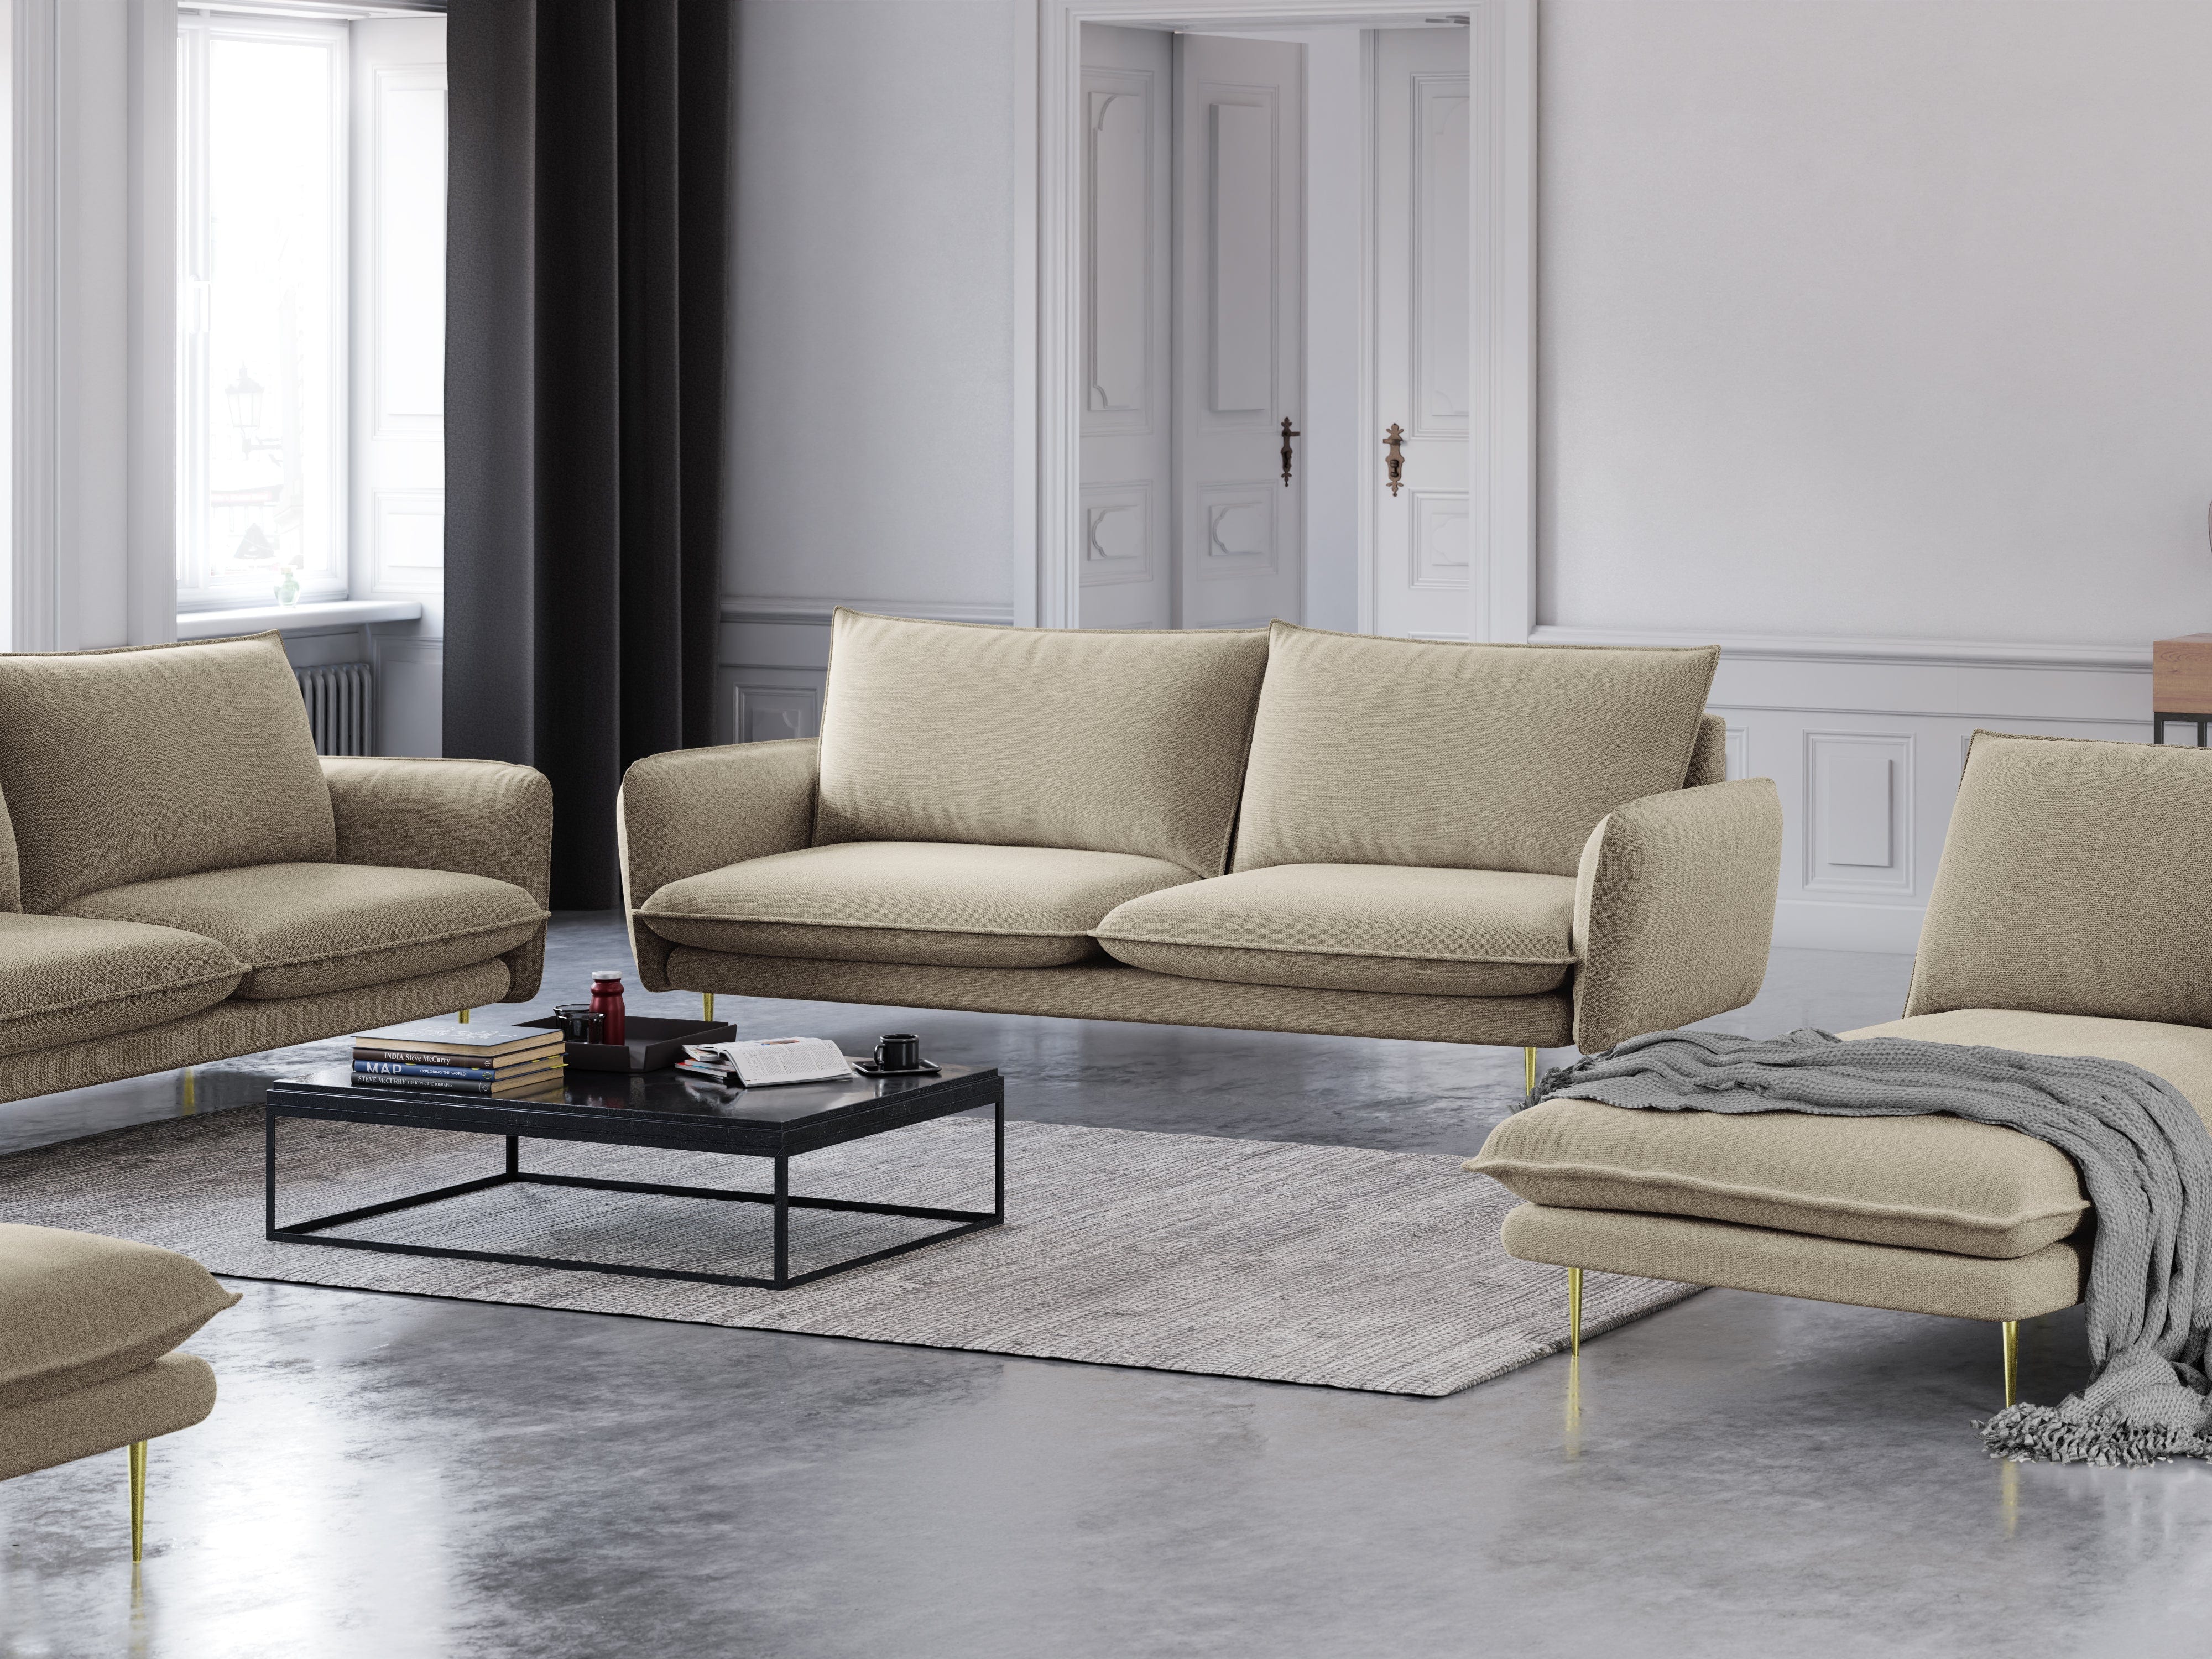 4-seater sofa VIENNA beige with gold base